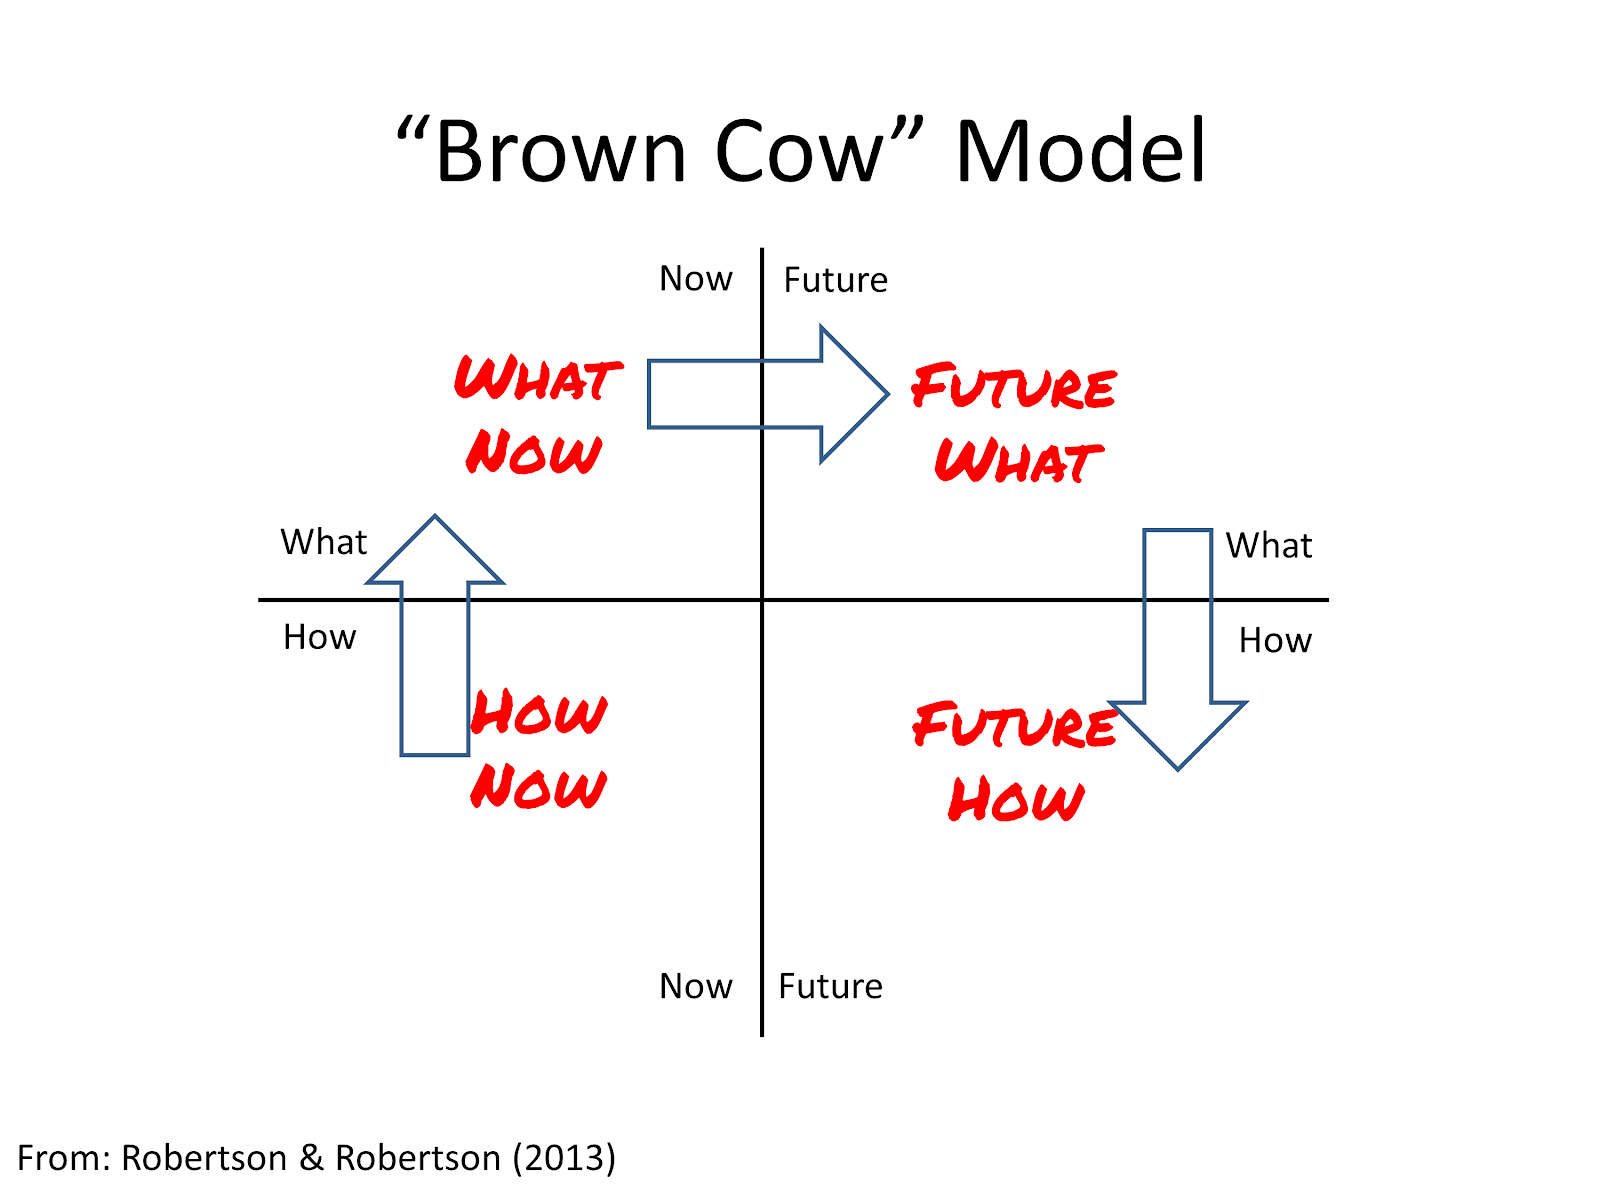 Brown Cow Model. Four quadrants. How Now, What Now, Future What, Future How. From Robertson & Robertson (2013)